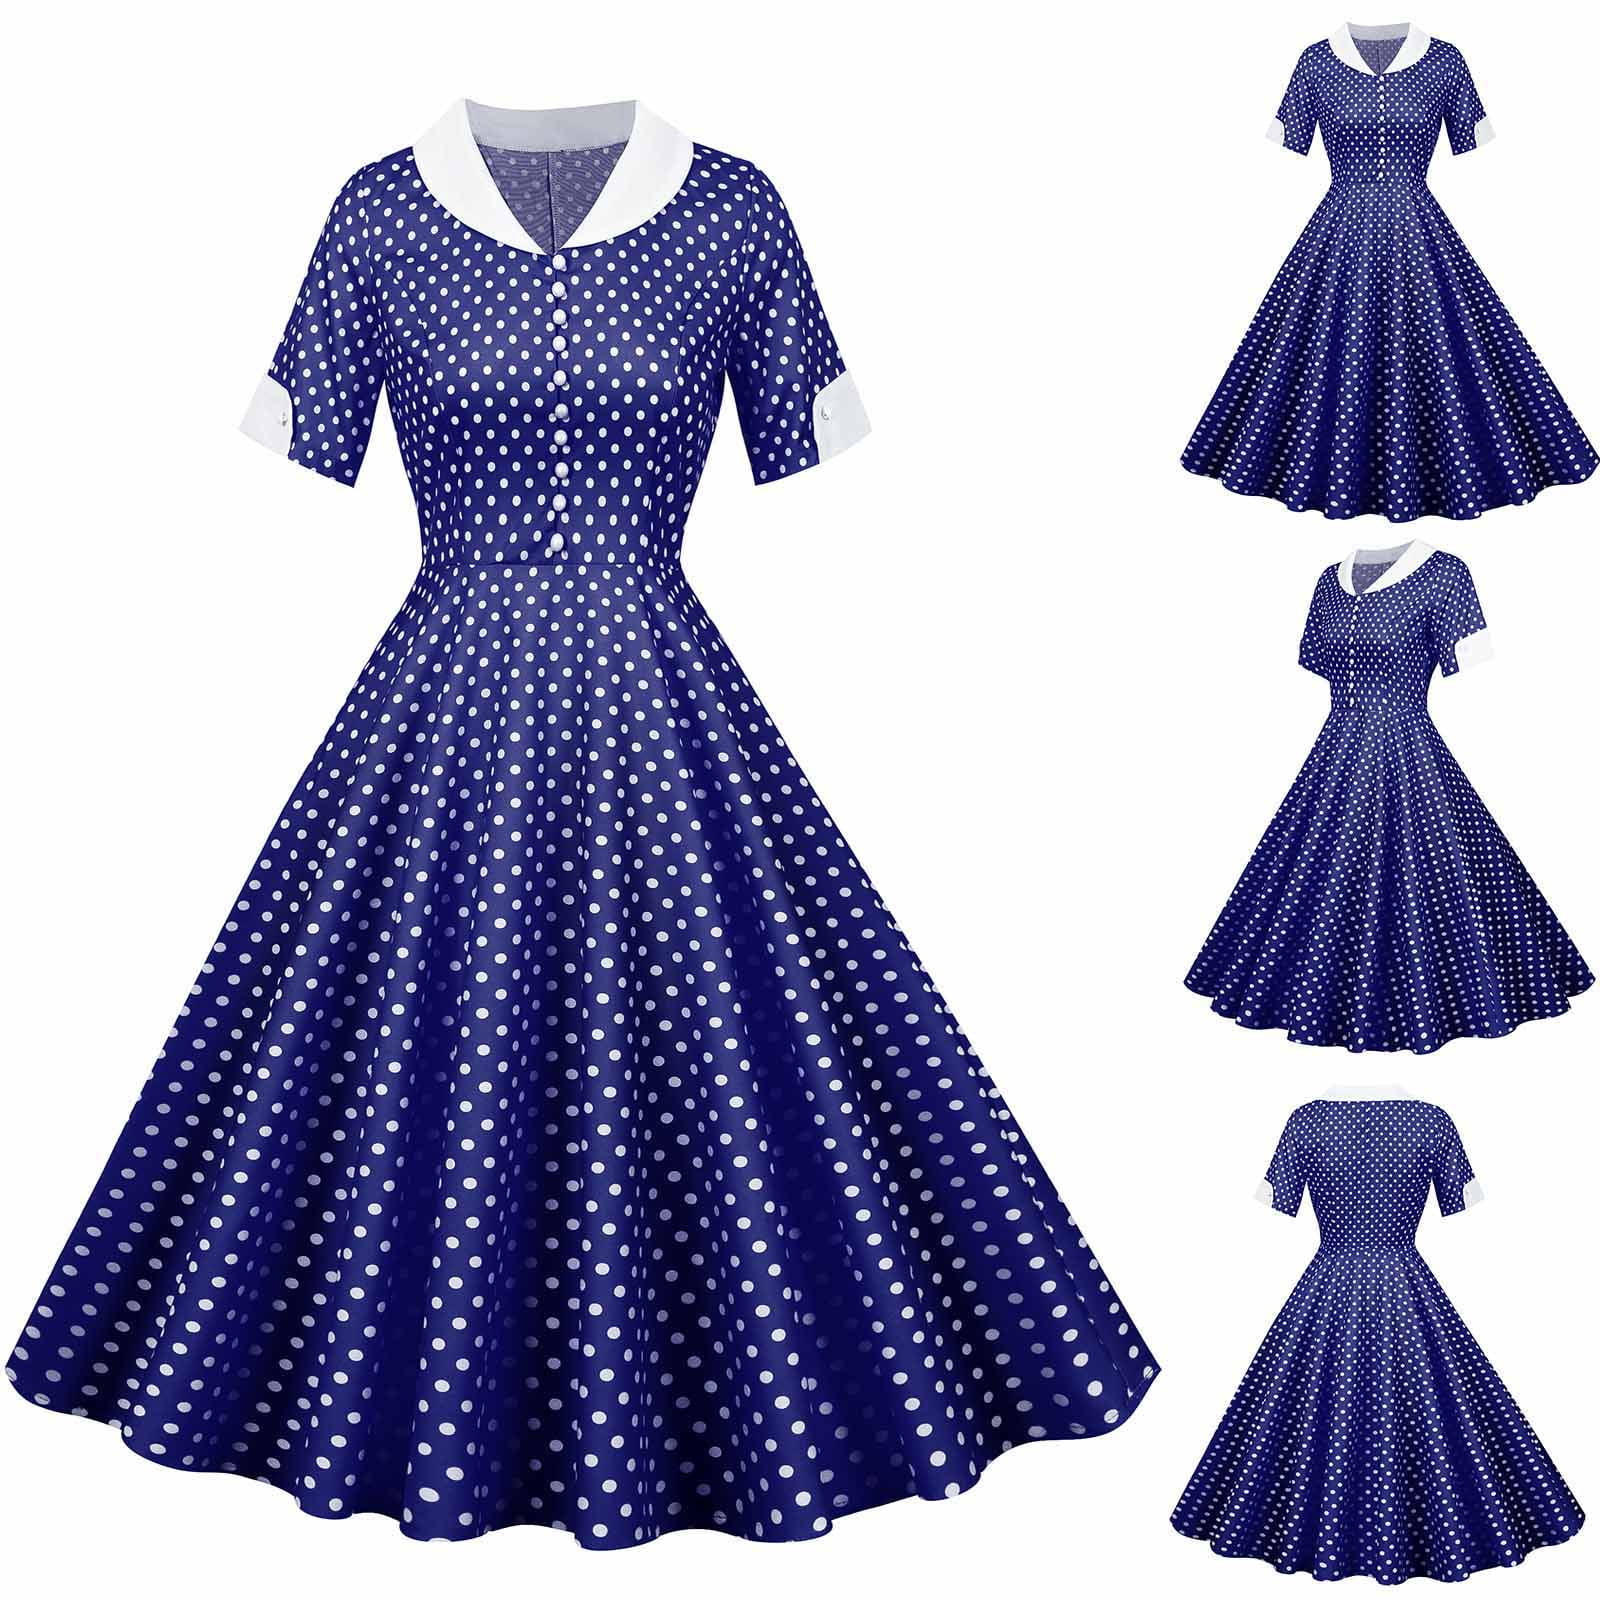 Women Vintage Summer Print Short Sleeve Casual Evening Party Prom Dress